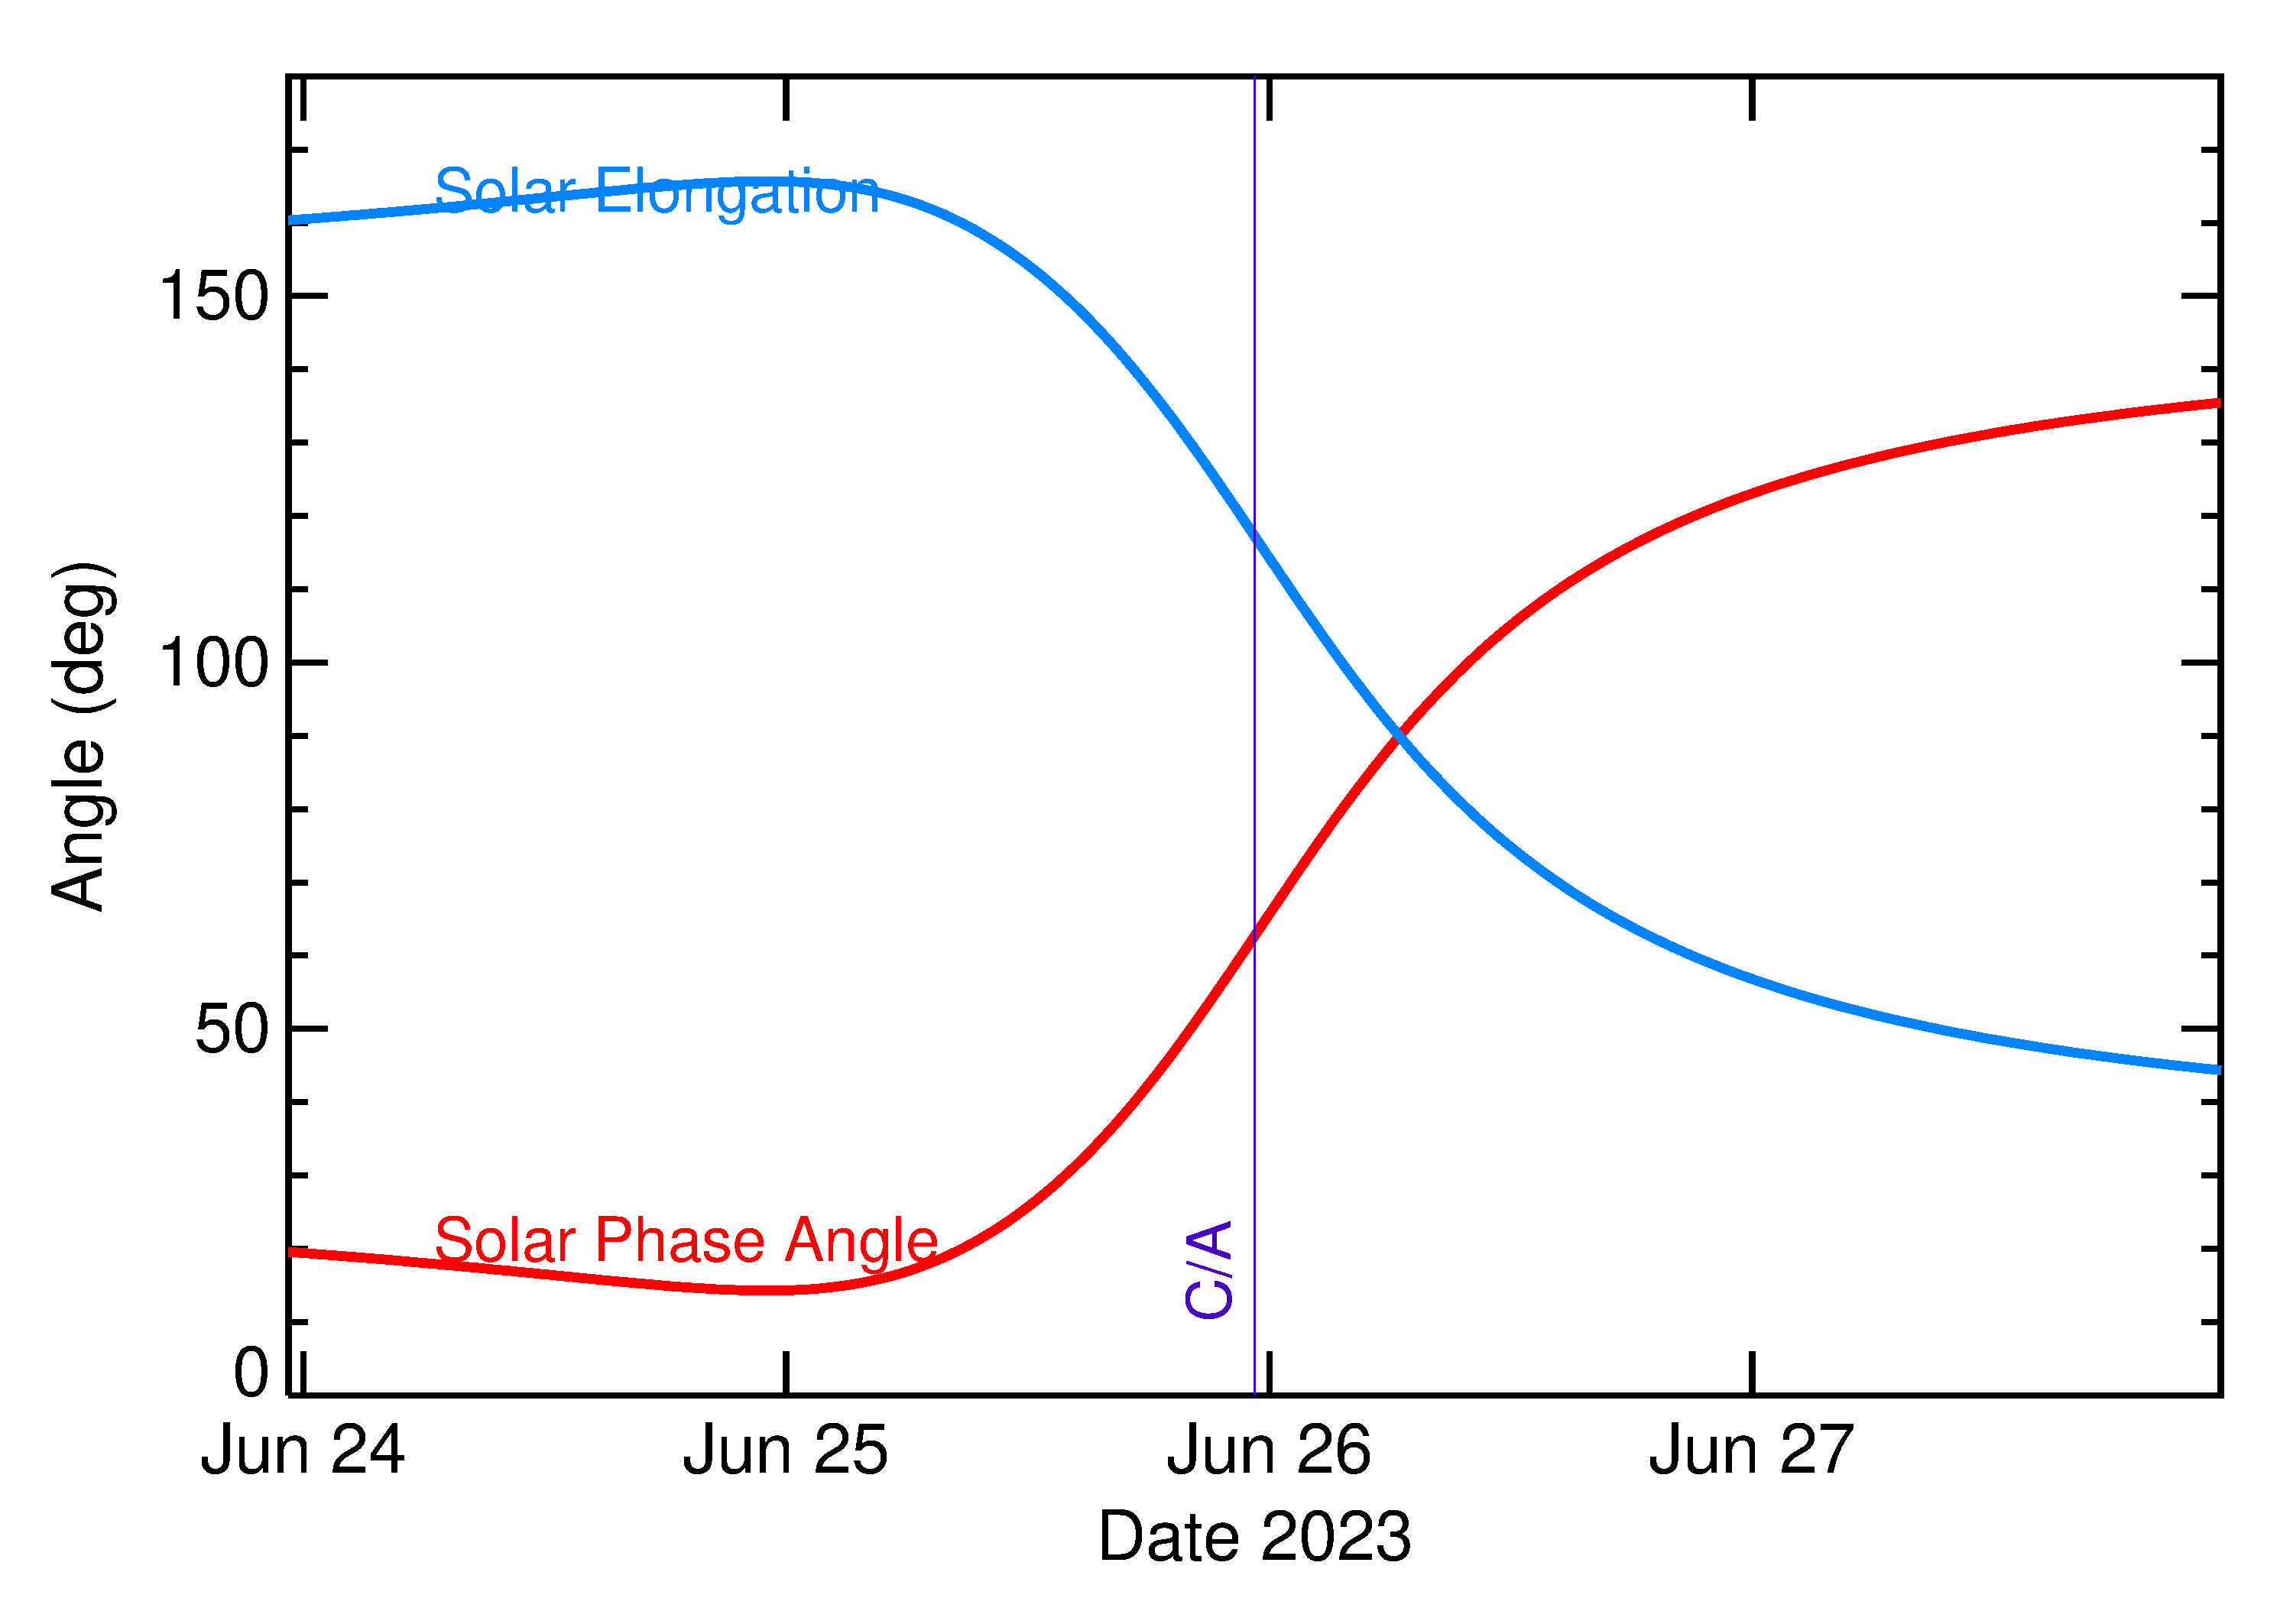 Solar Elongation and Solar Phase Angle of 2023 MU2 in the days around closest approach